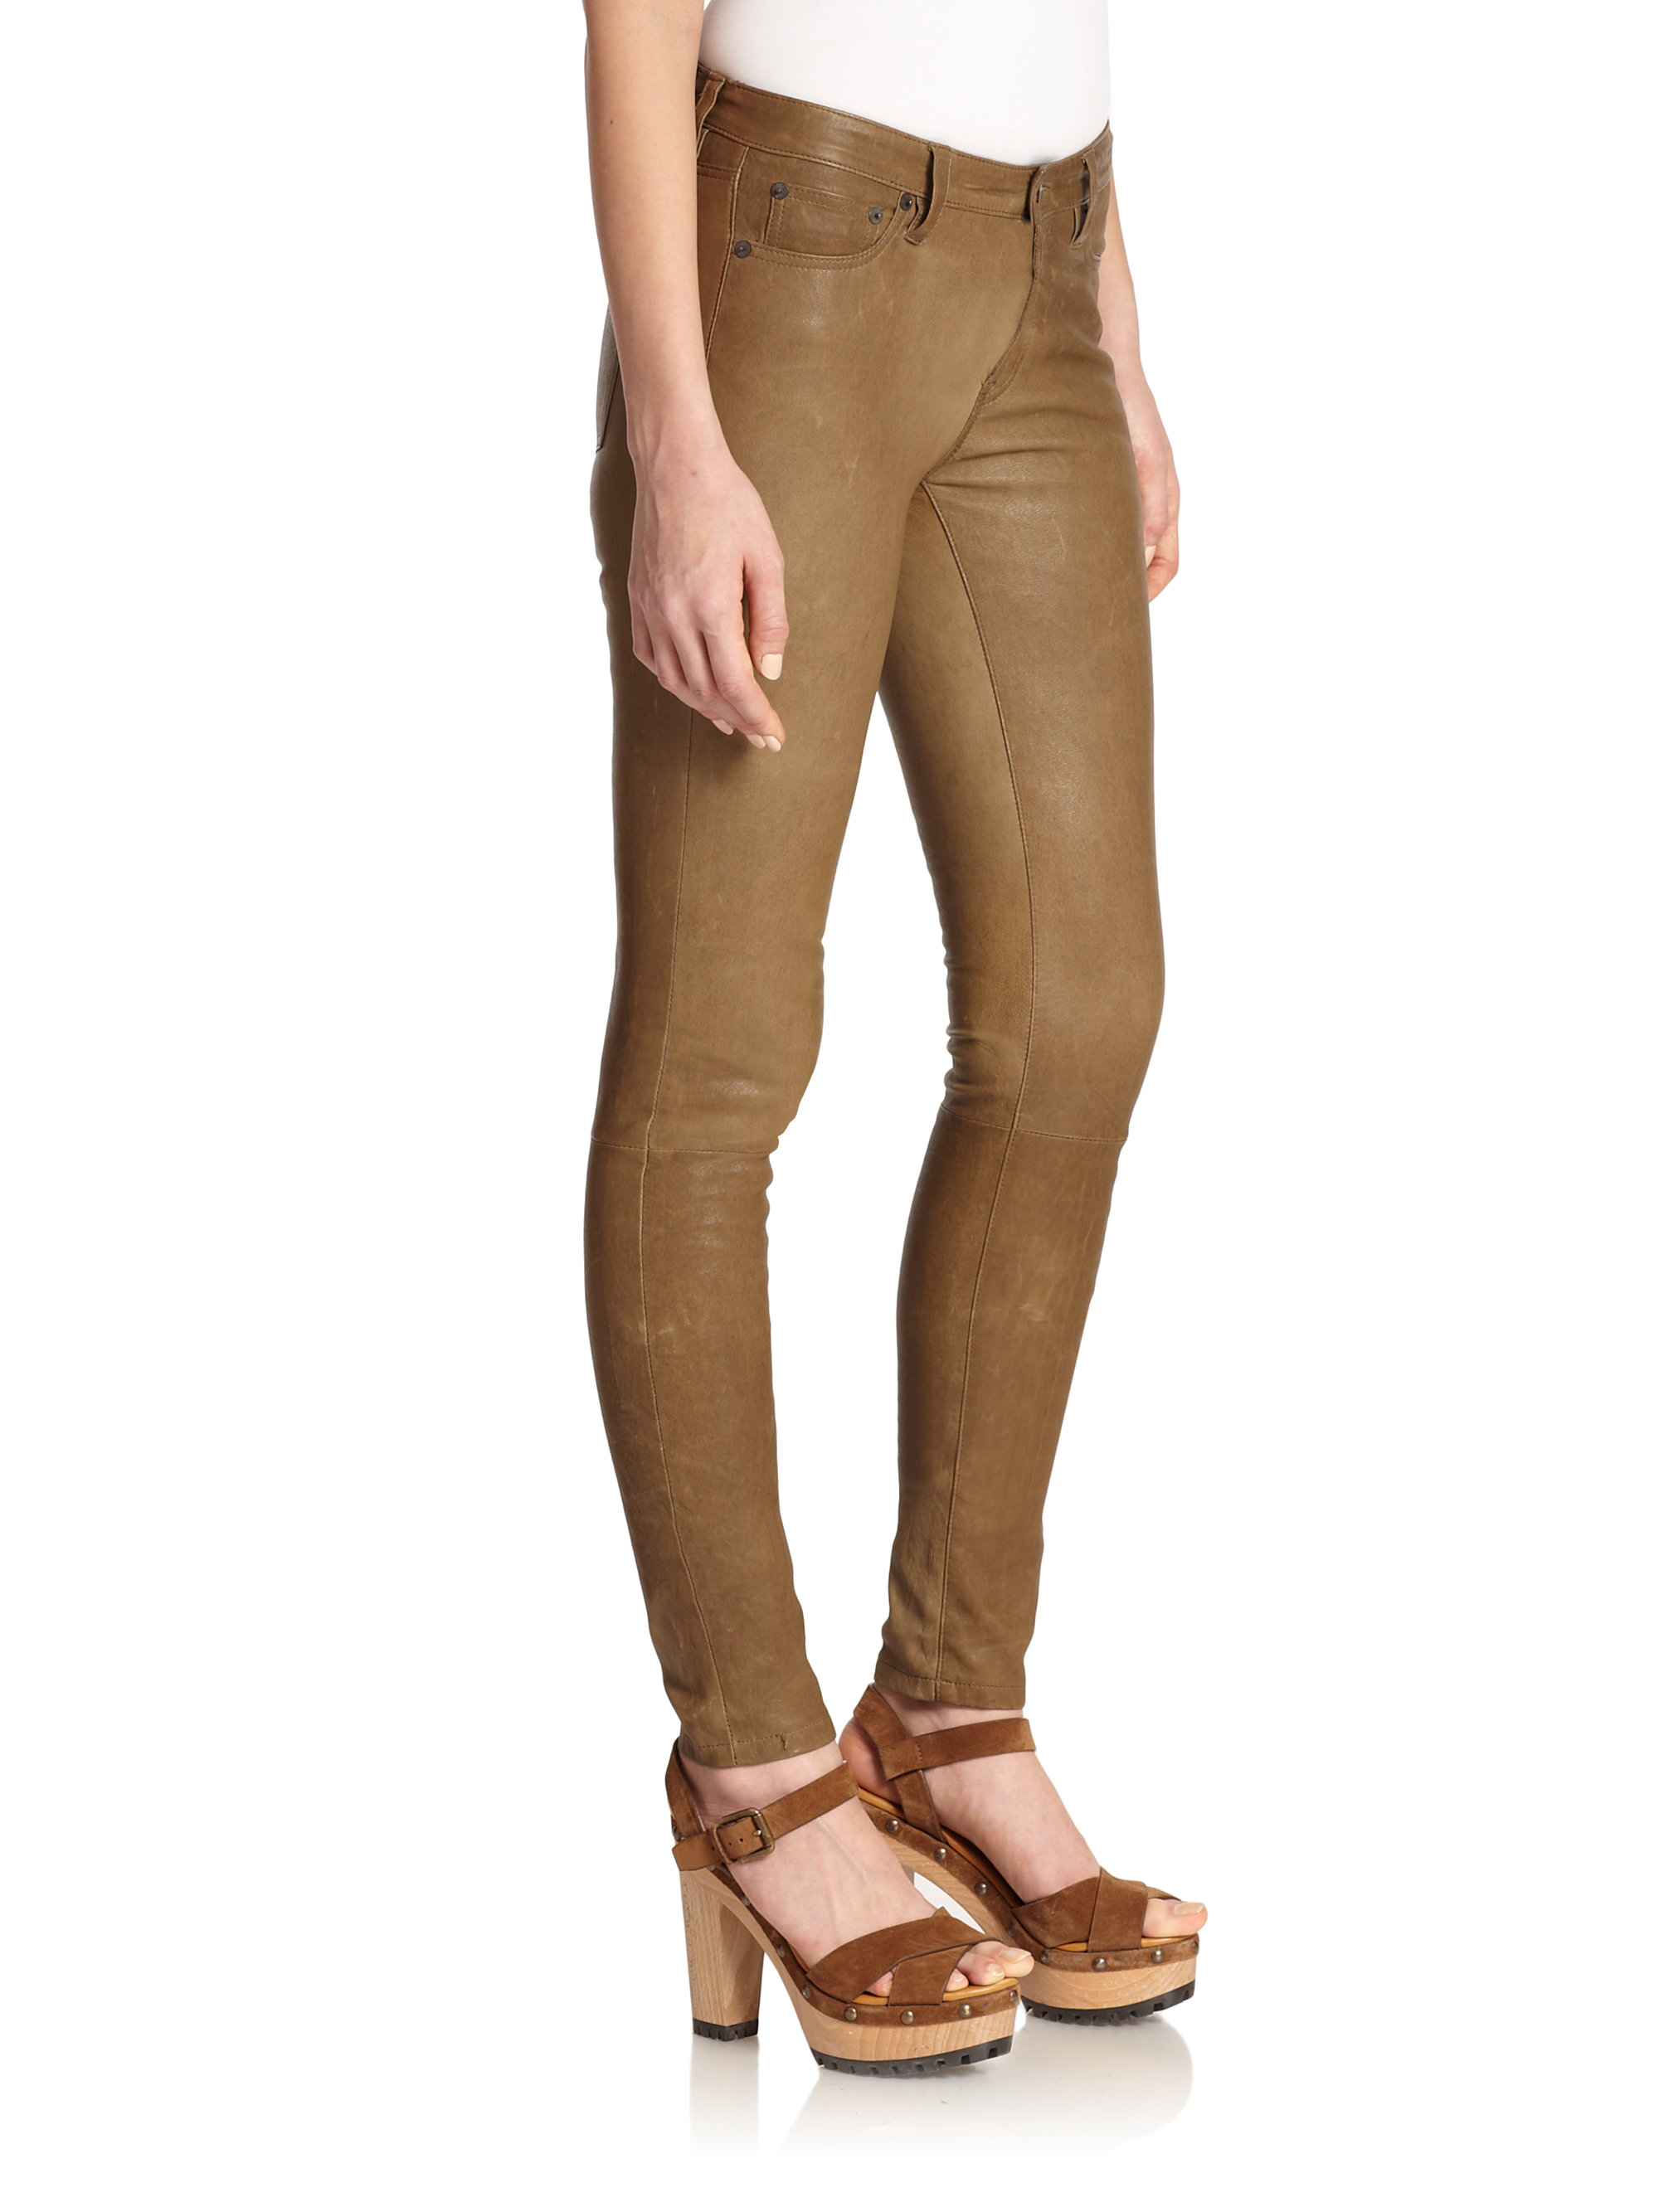 Lyst - Polo Ralph Lauren Leather Skinny Pants in Natural